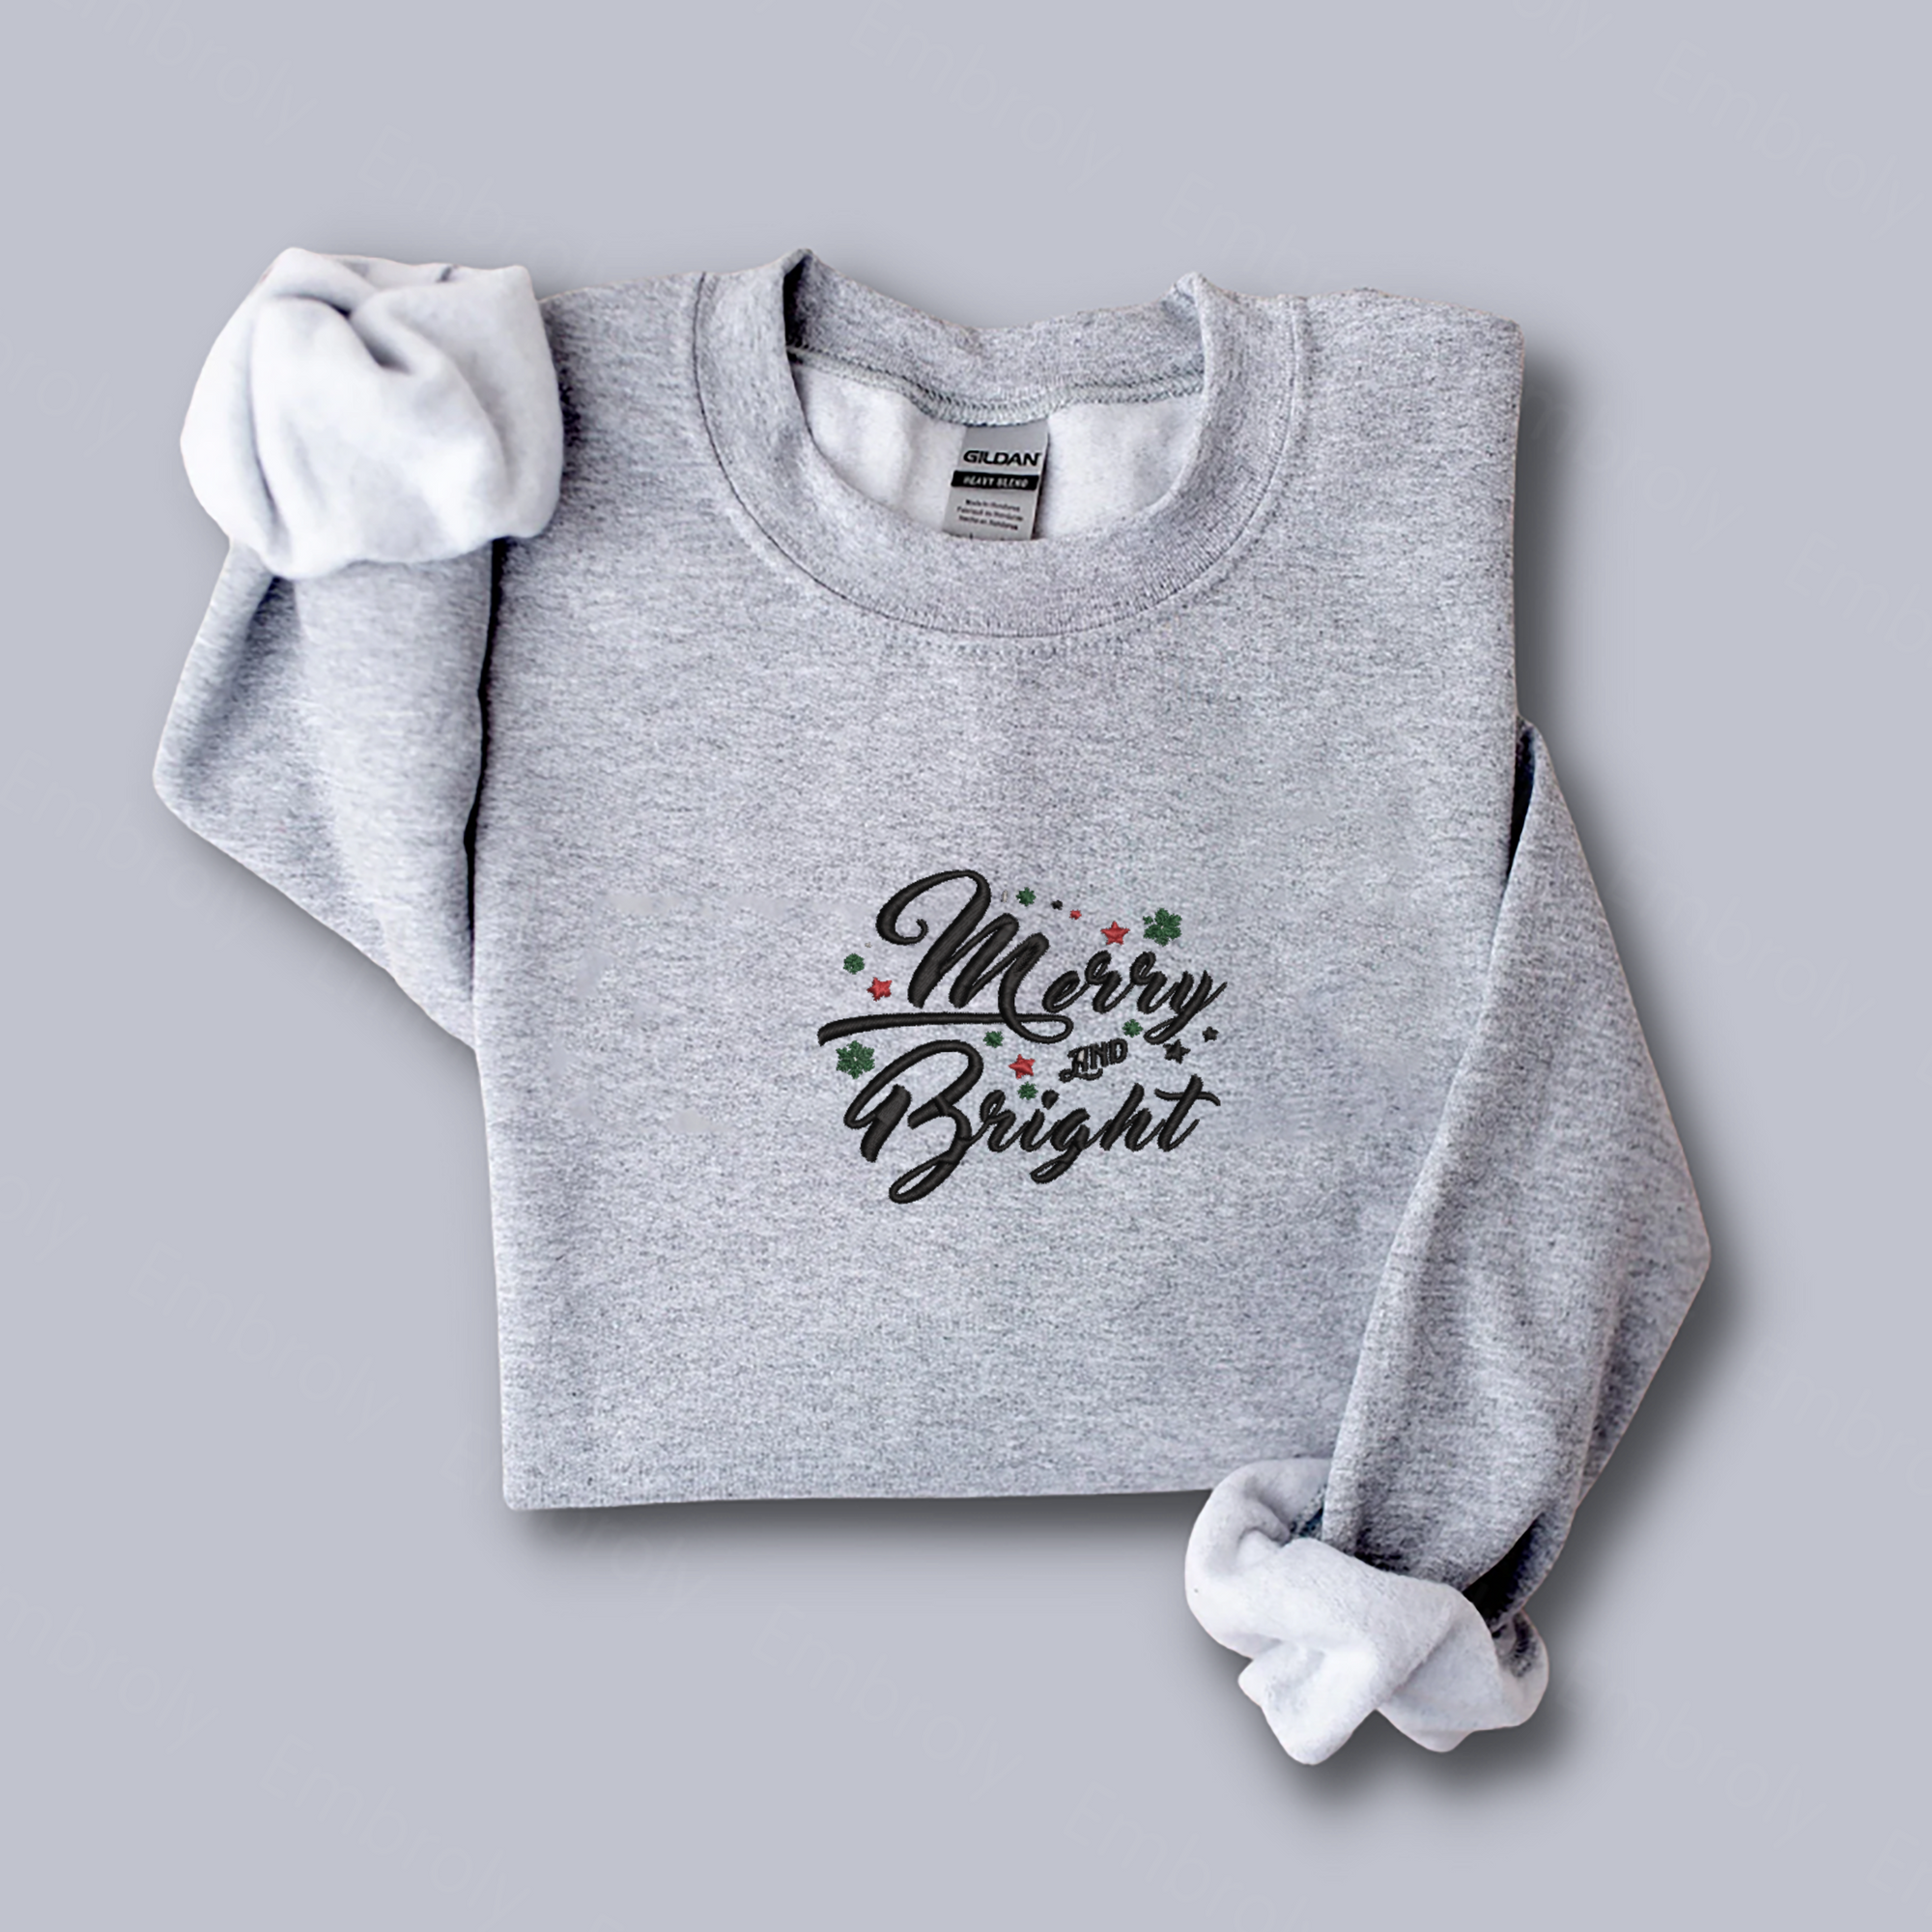 Merry Bright Christmas Gifts Sweatshirt, Hoodie Embroidered